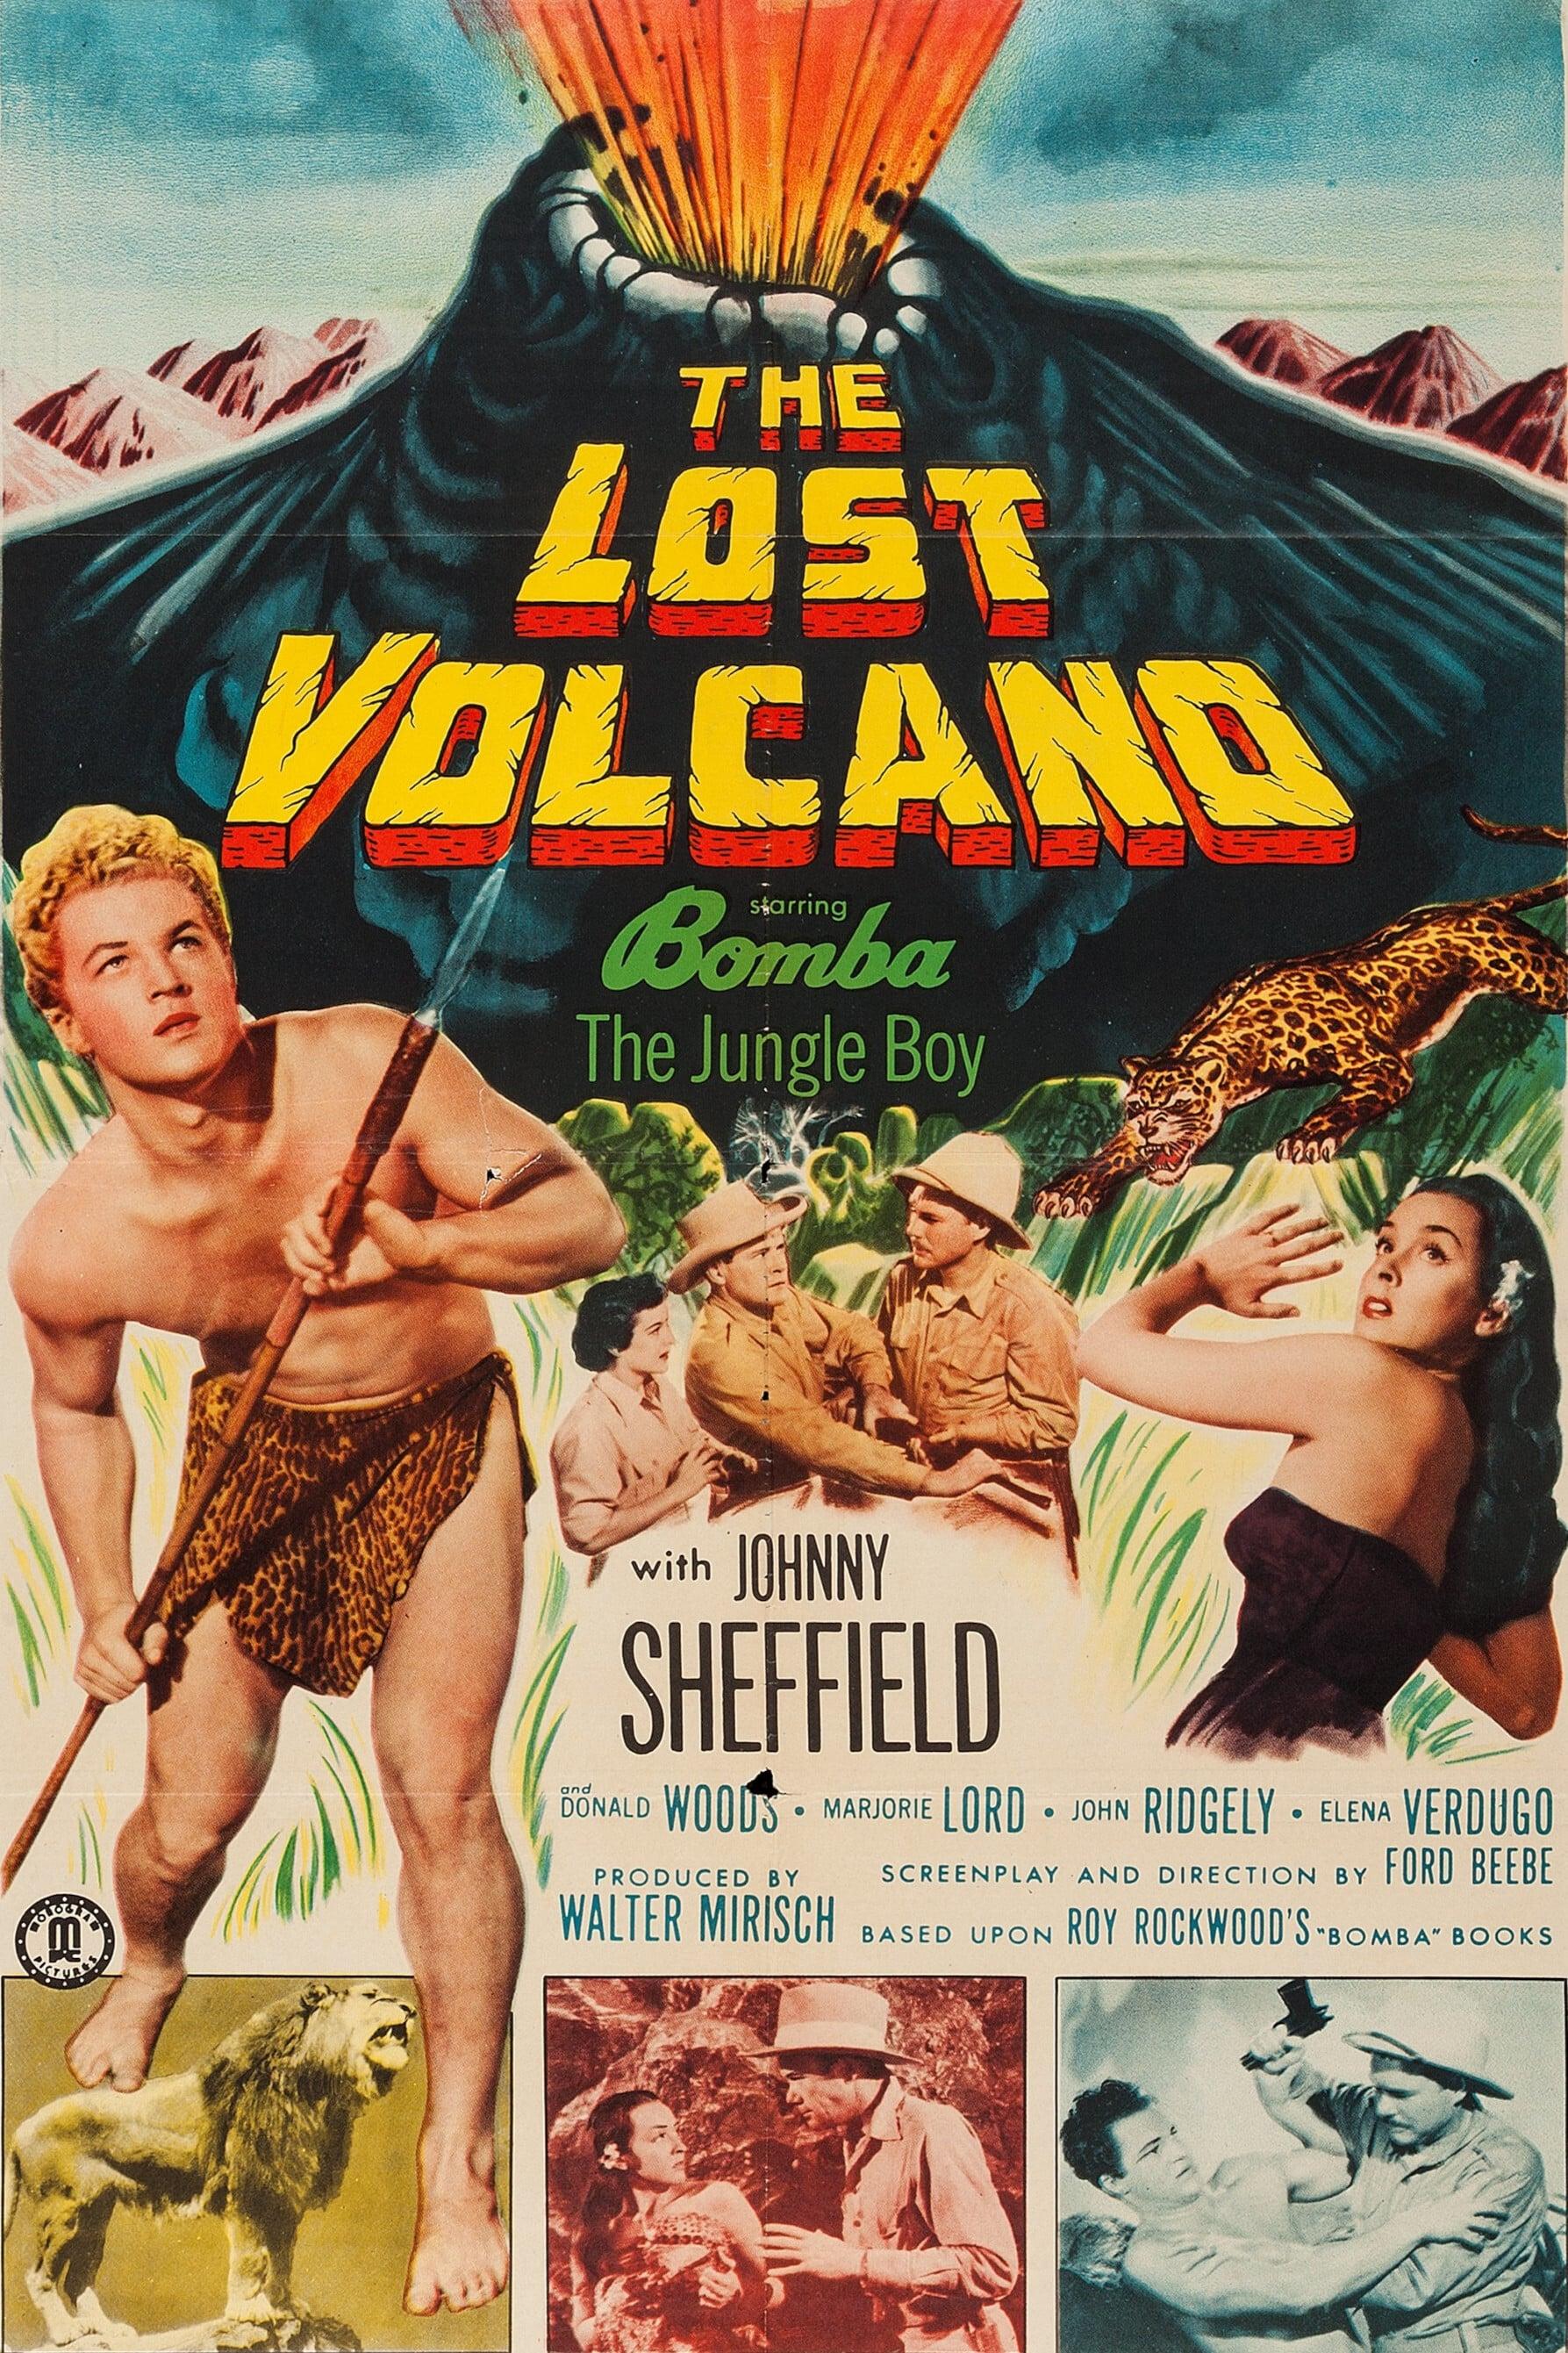 The Lost Volcano poster